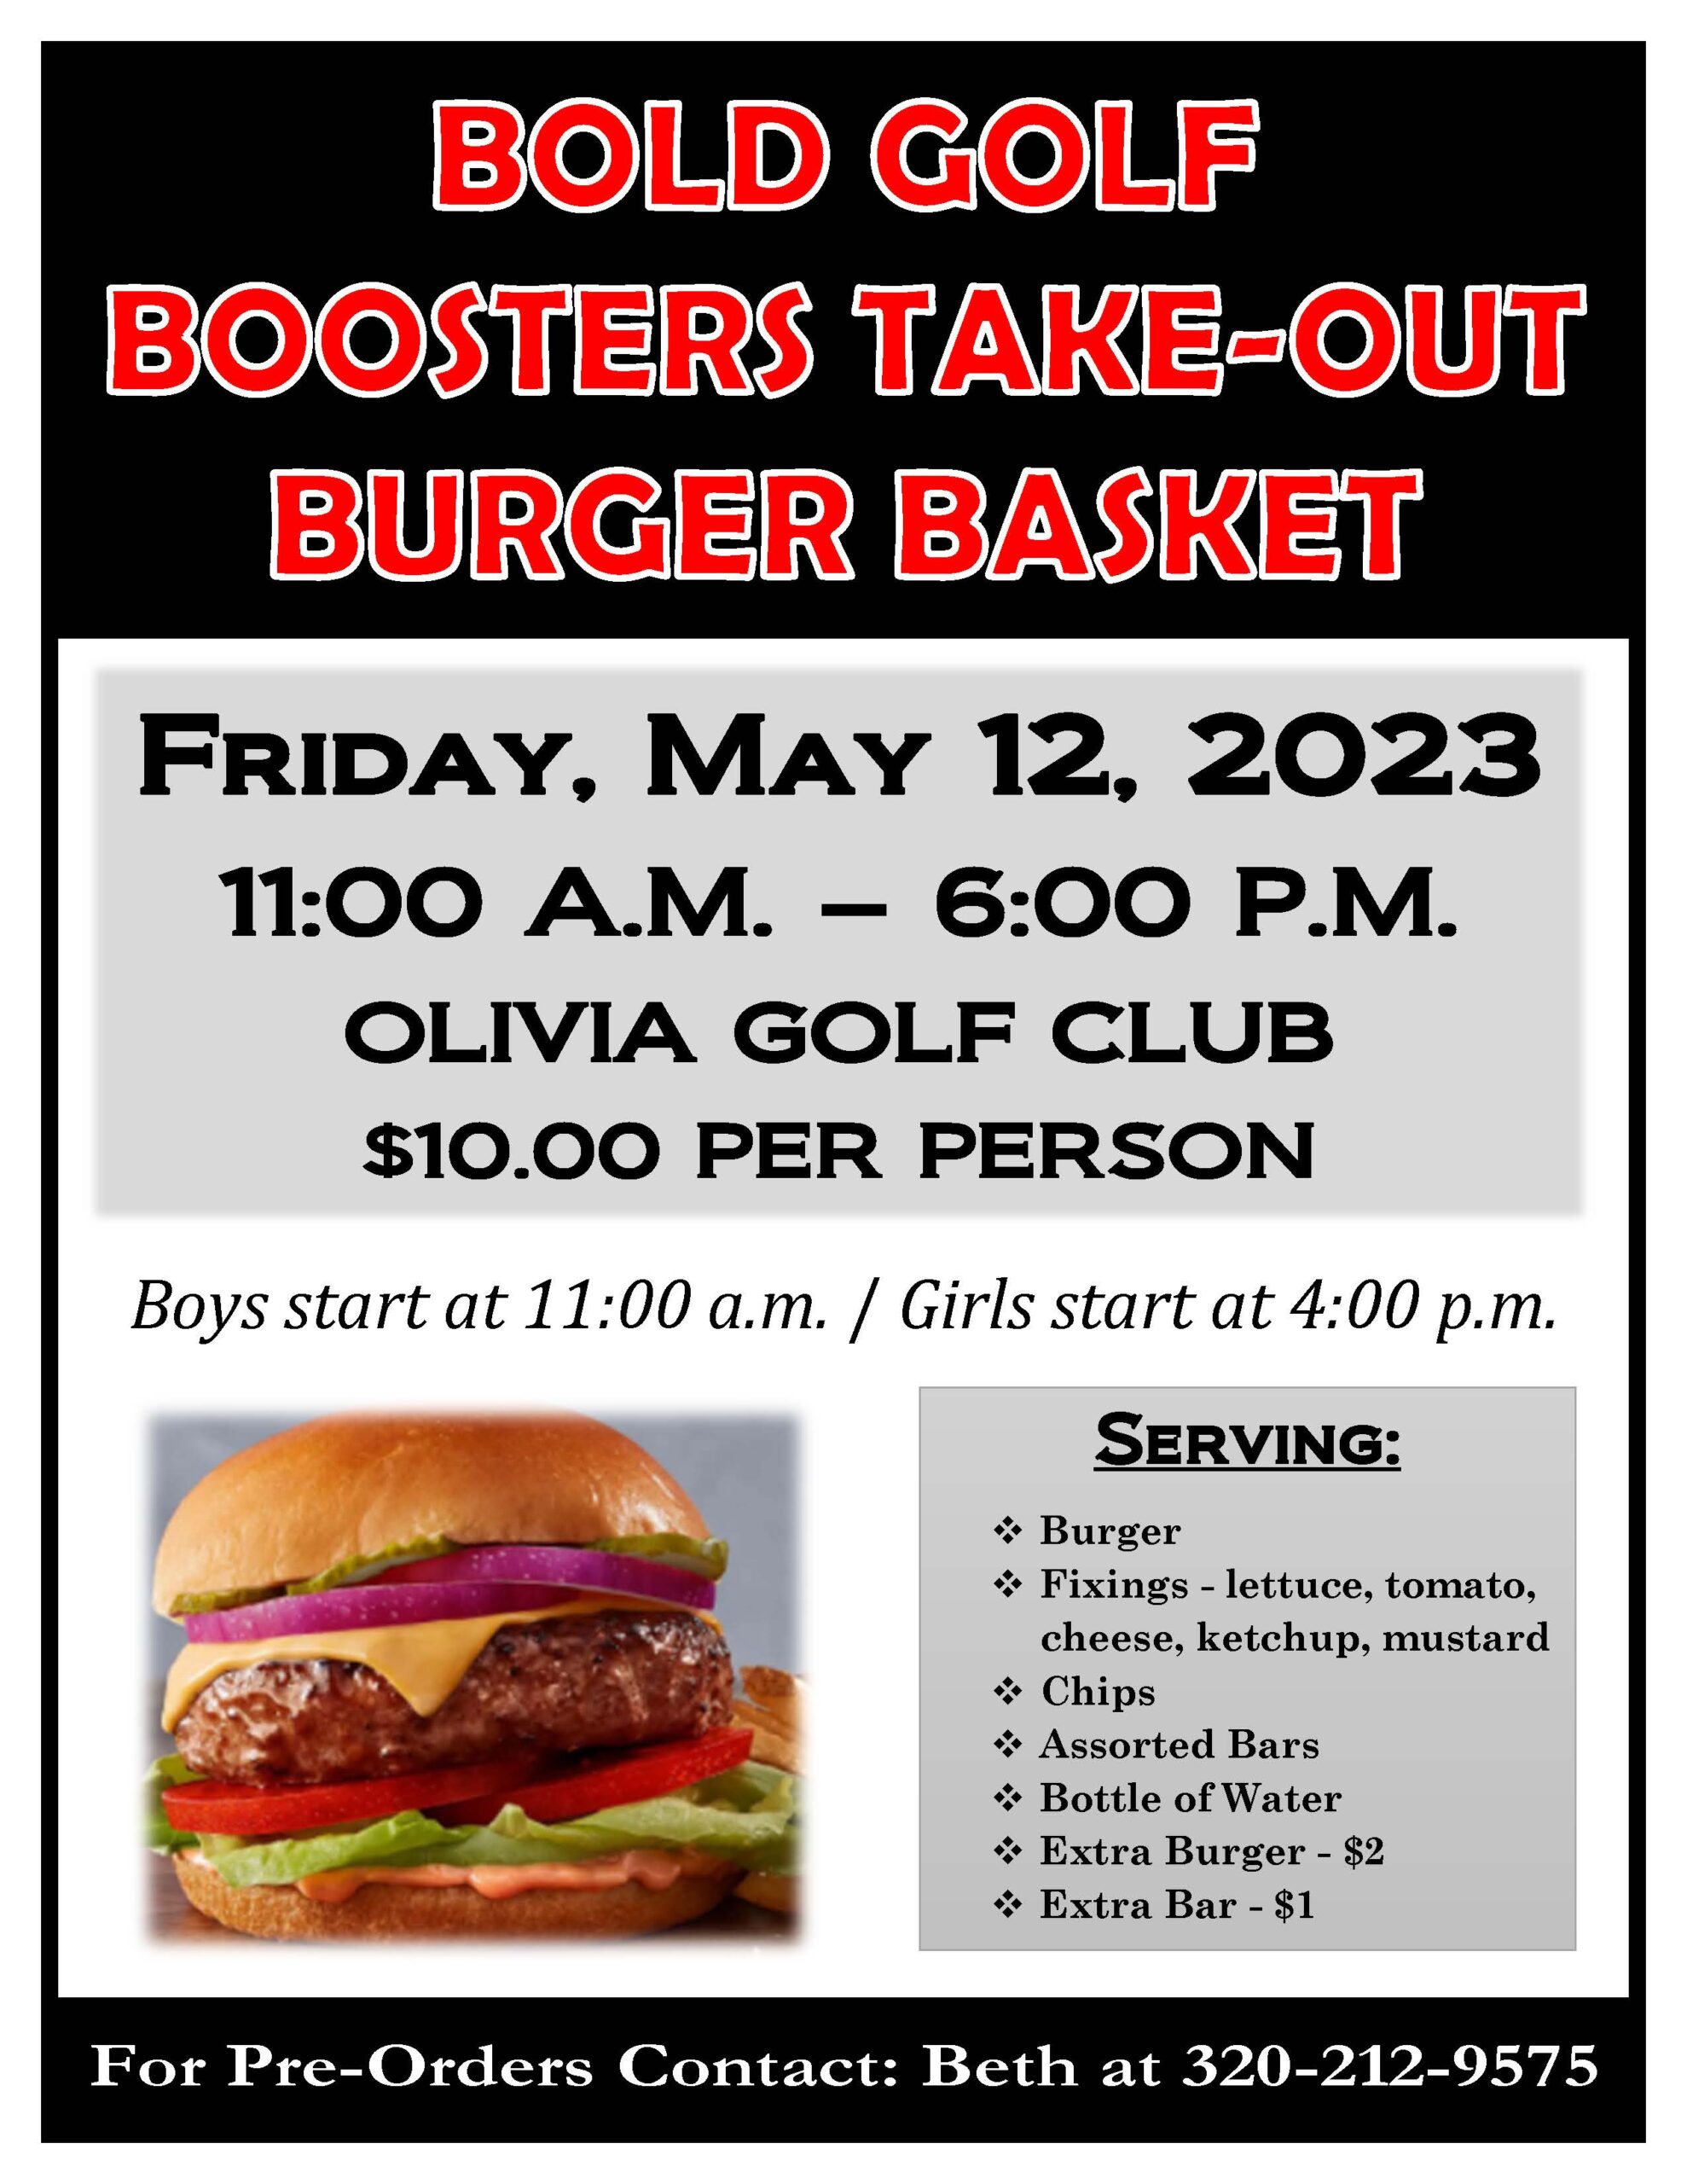 <h1 class="tribe-events-single-event-title">BOLD GOLF BOOSTERS TAKE-OUT BURGER BASKET</h1>